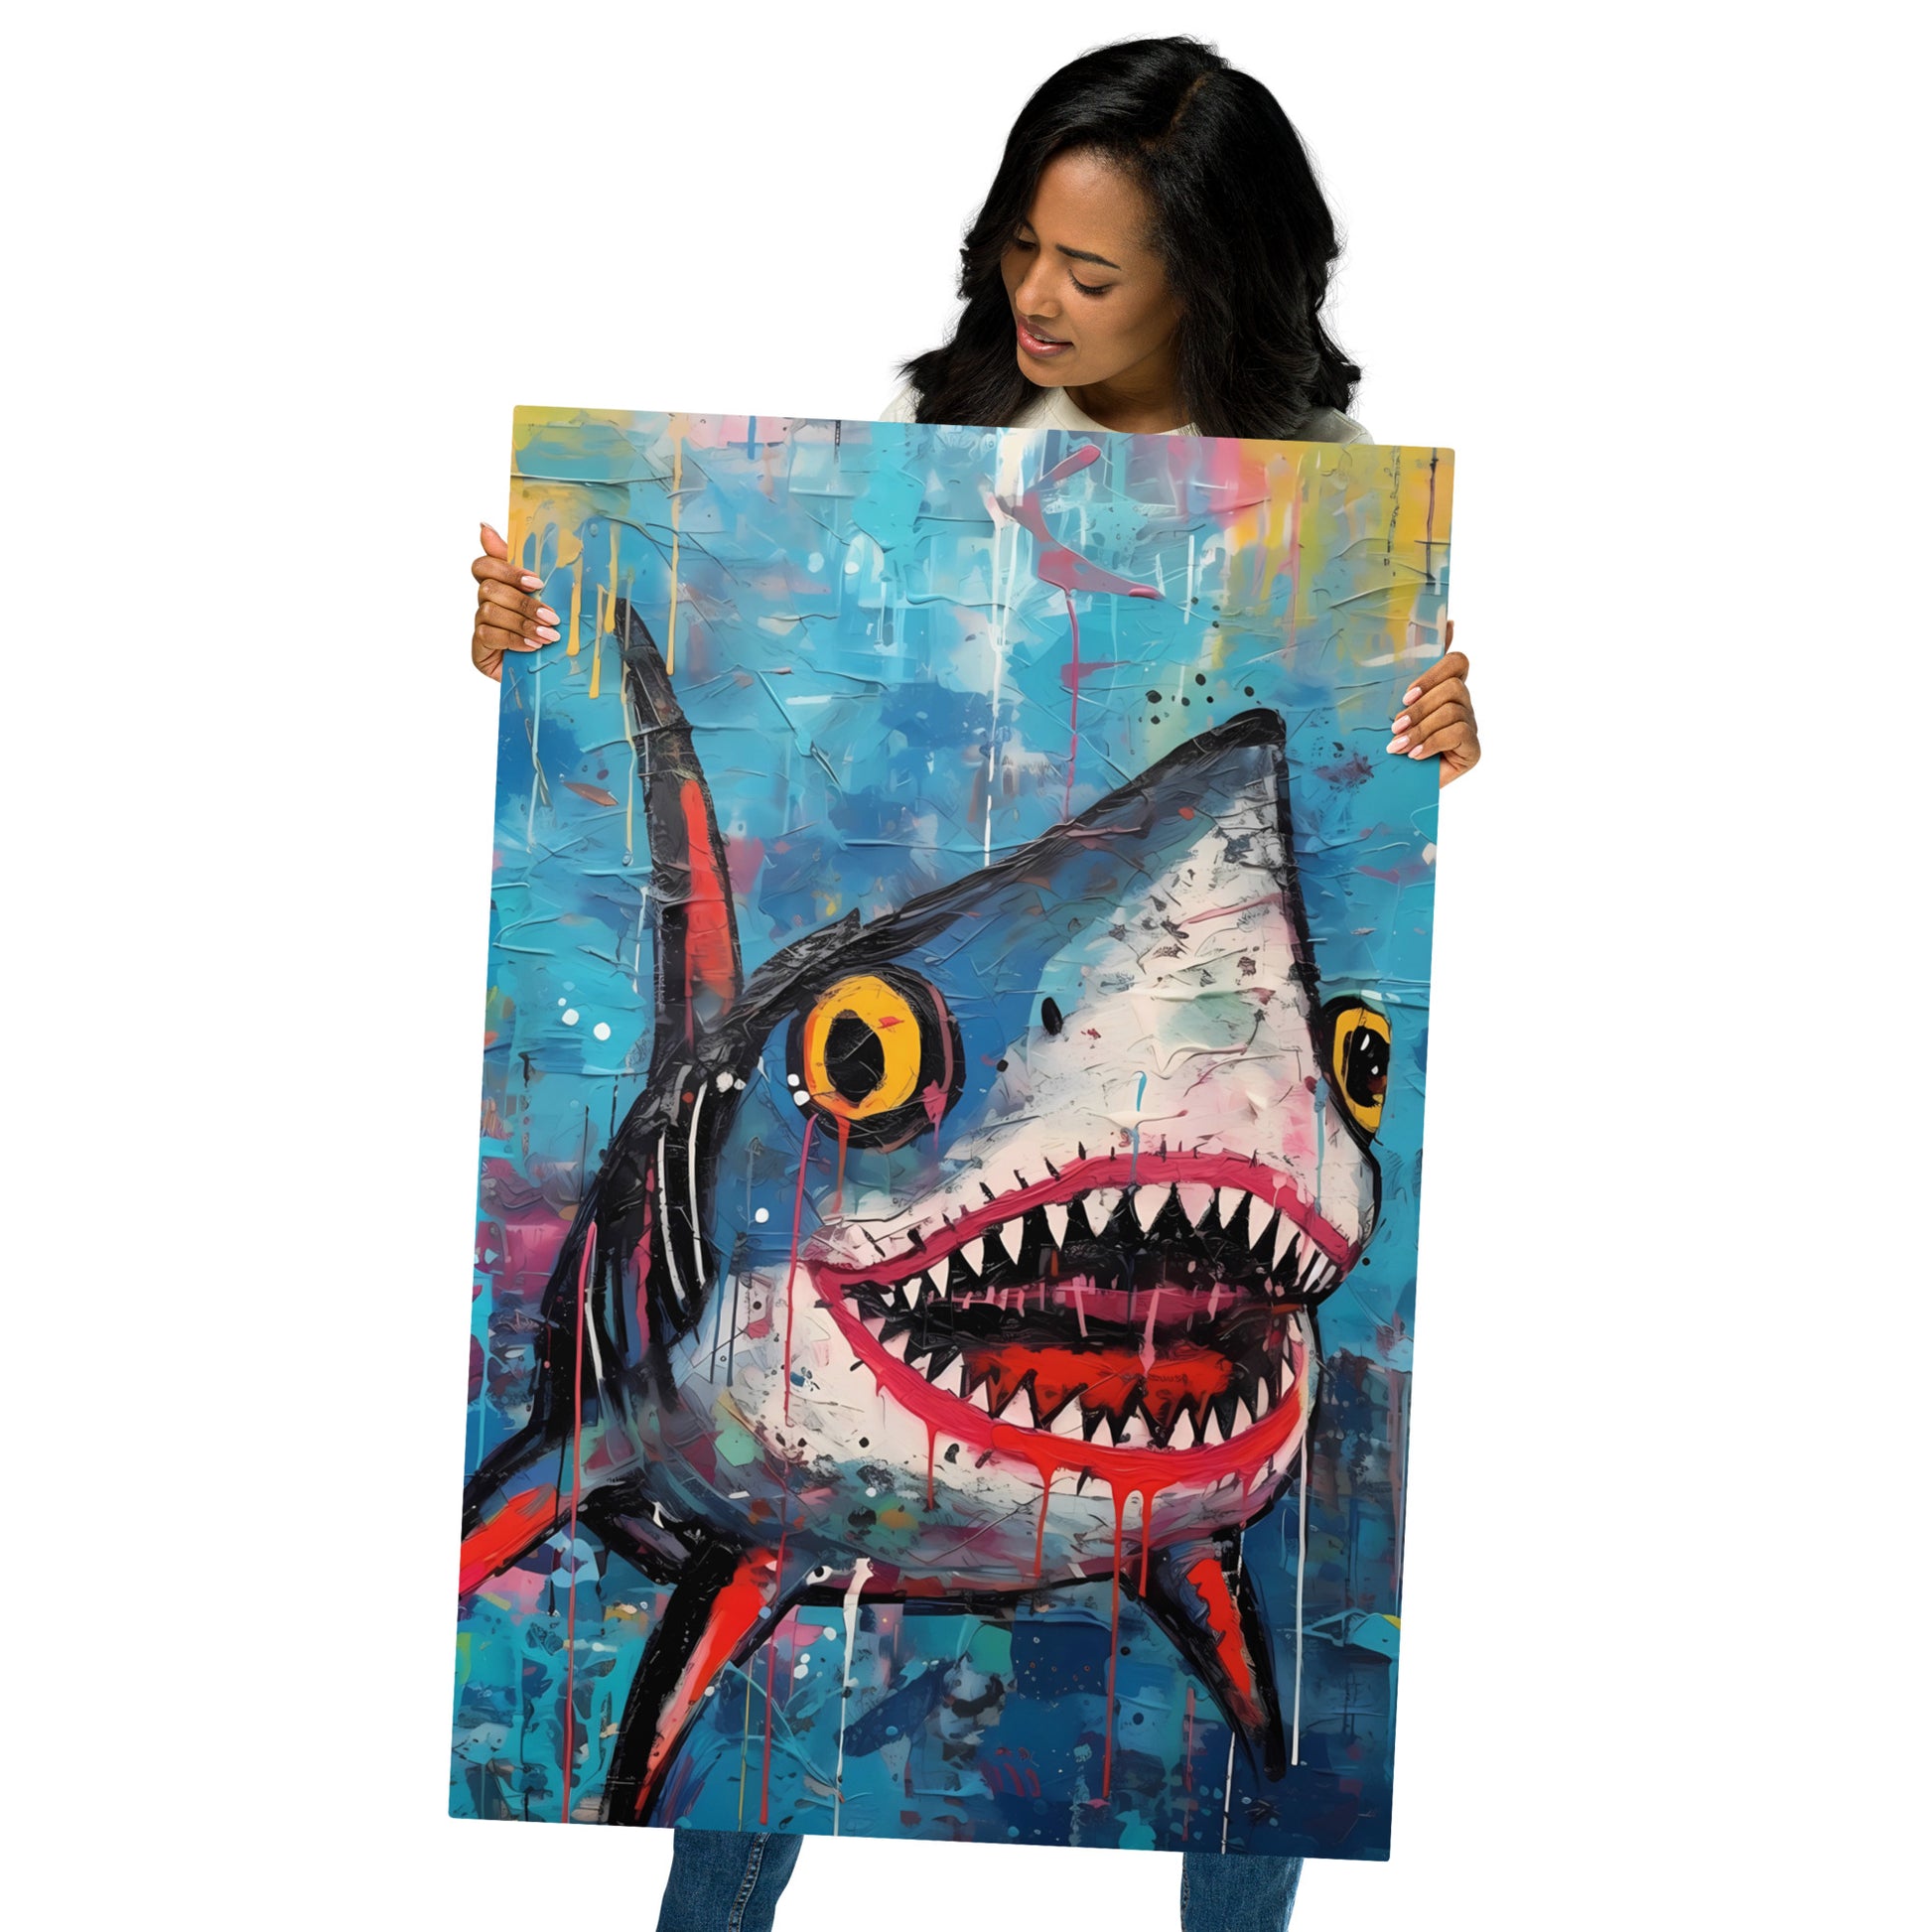 Vibrant Shark Art Poster: A Colorful Dive Into the Deep